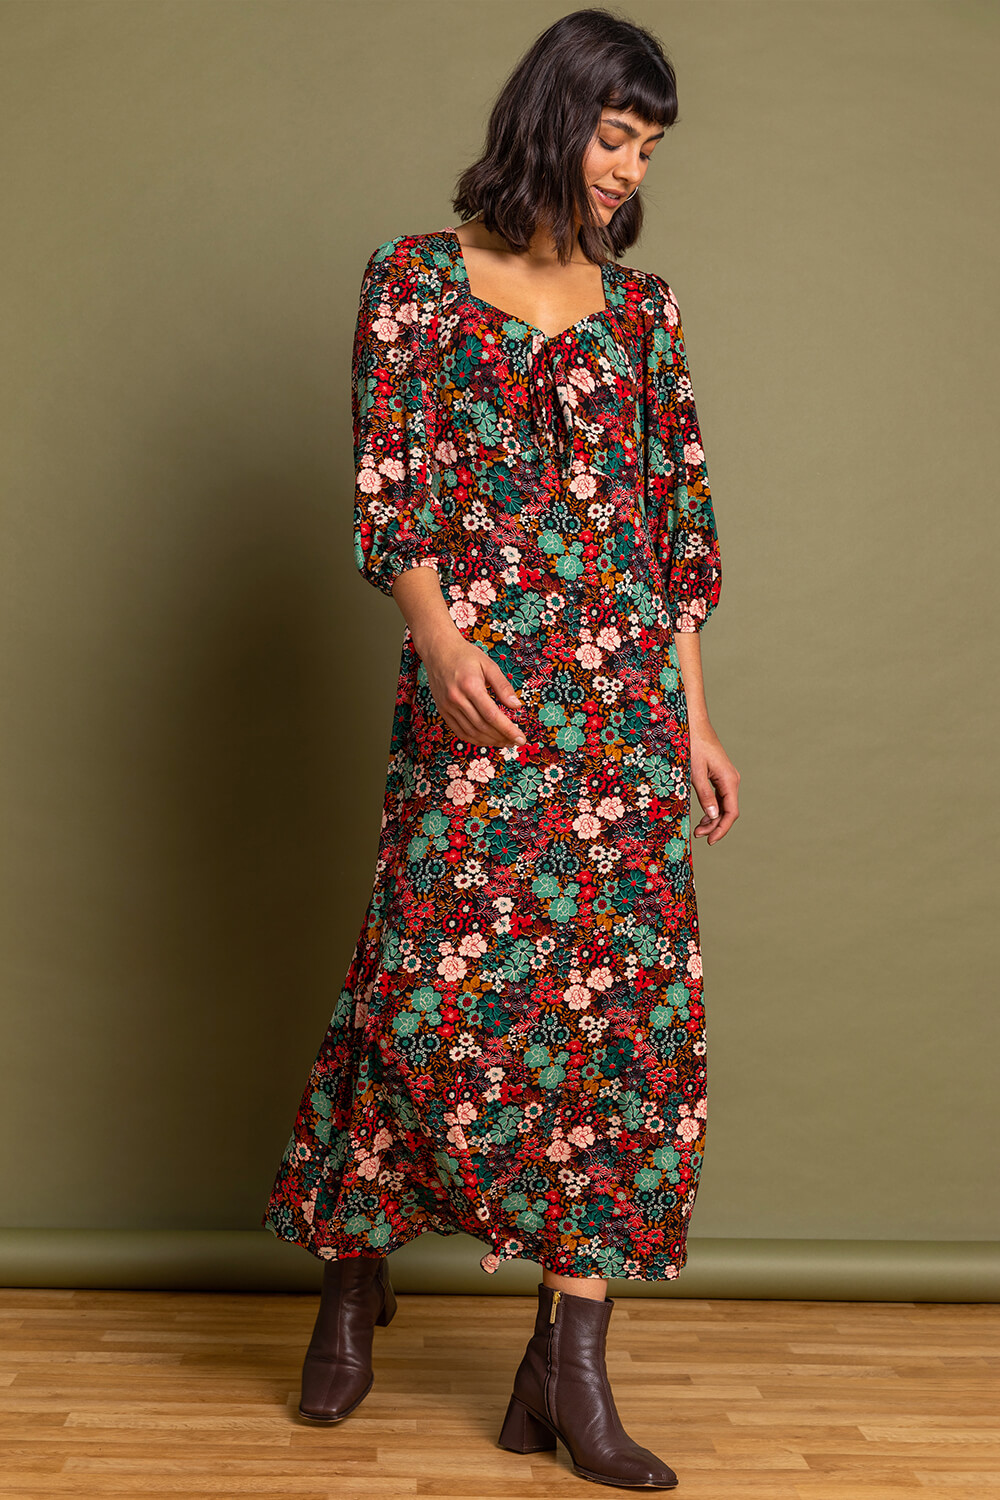 Rust Floral Print Tie Front Midi Dress, Image 3 of 5